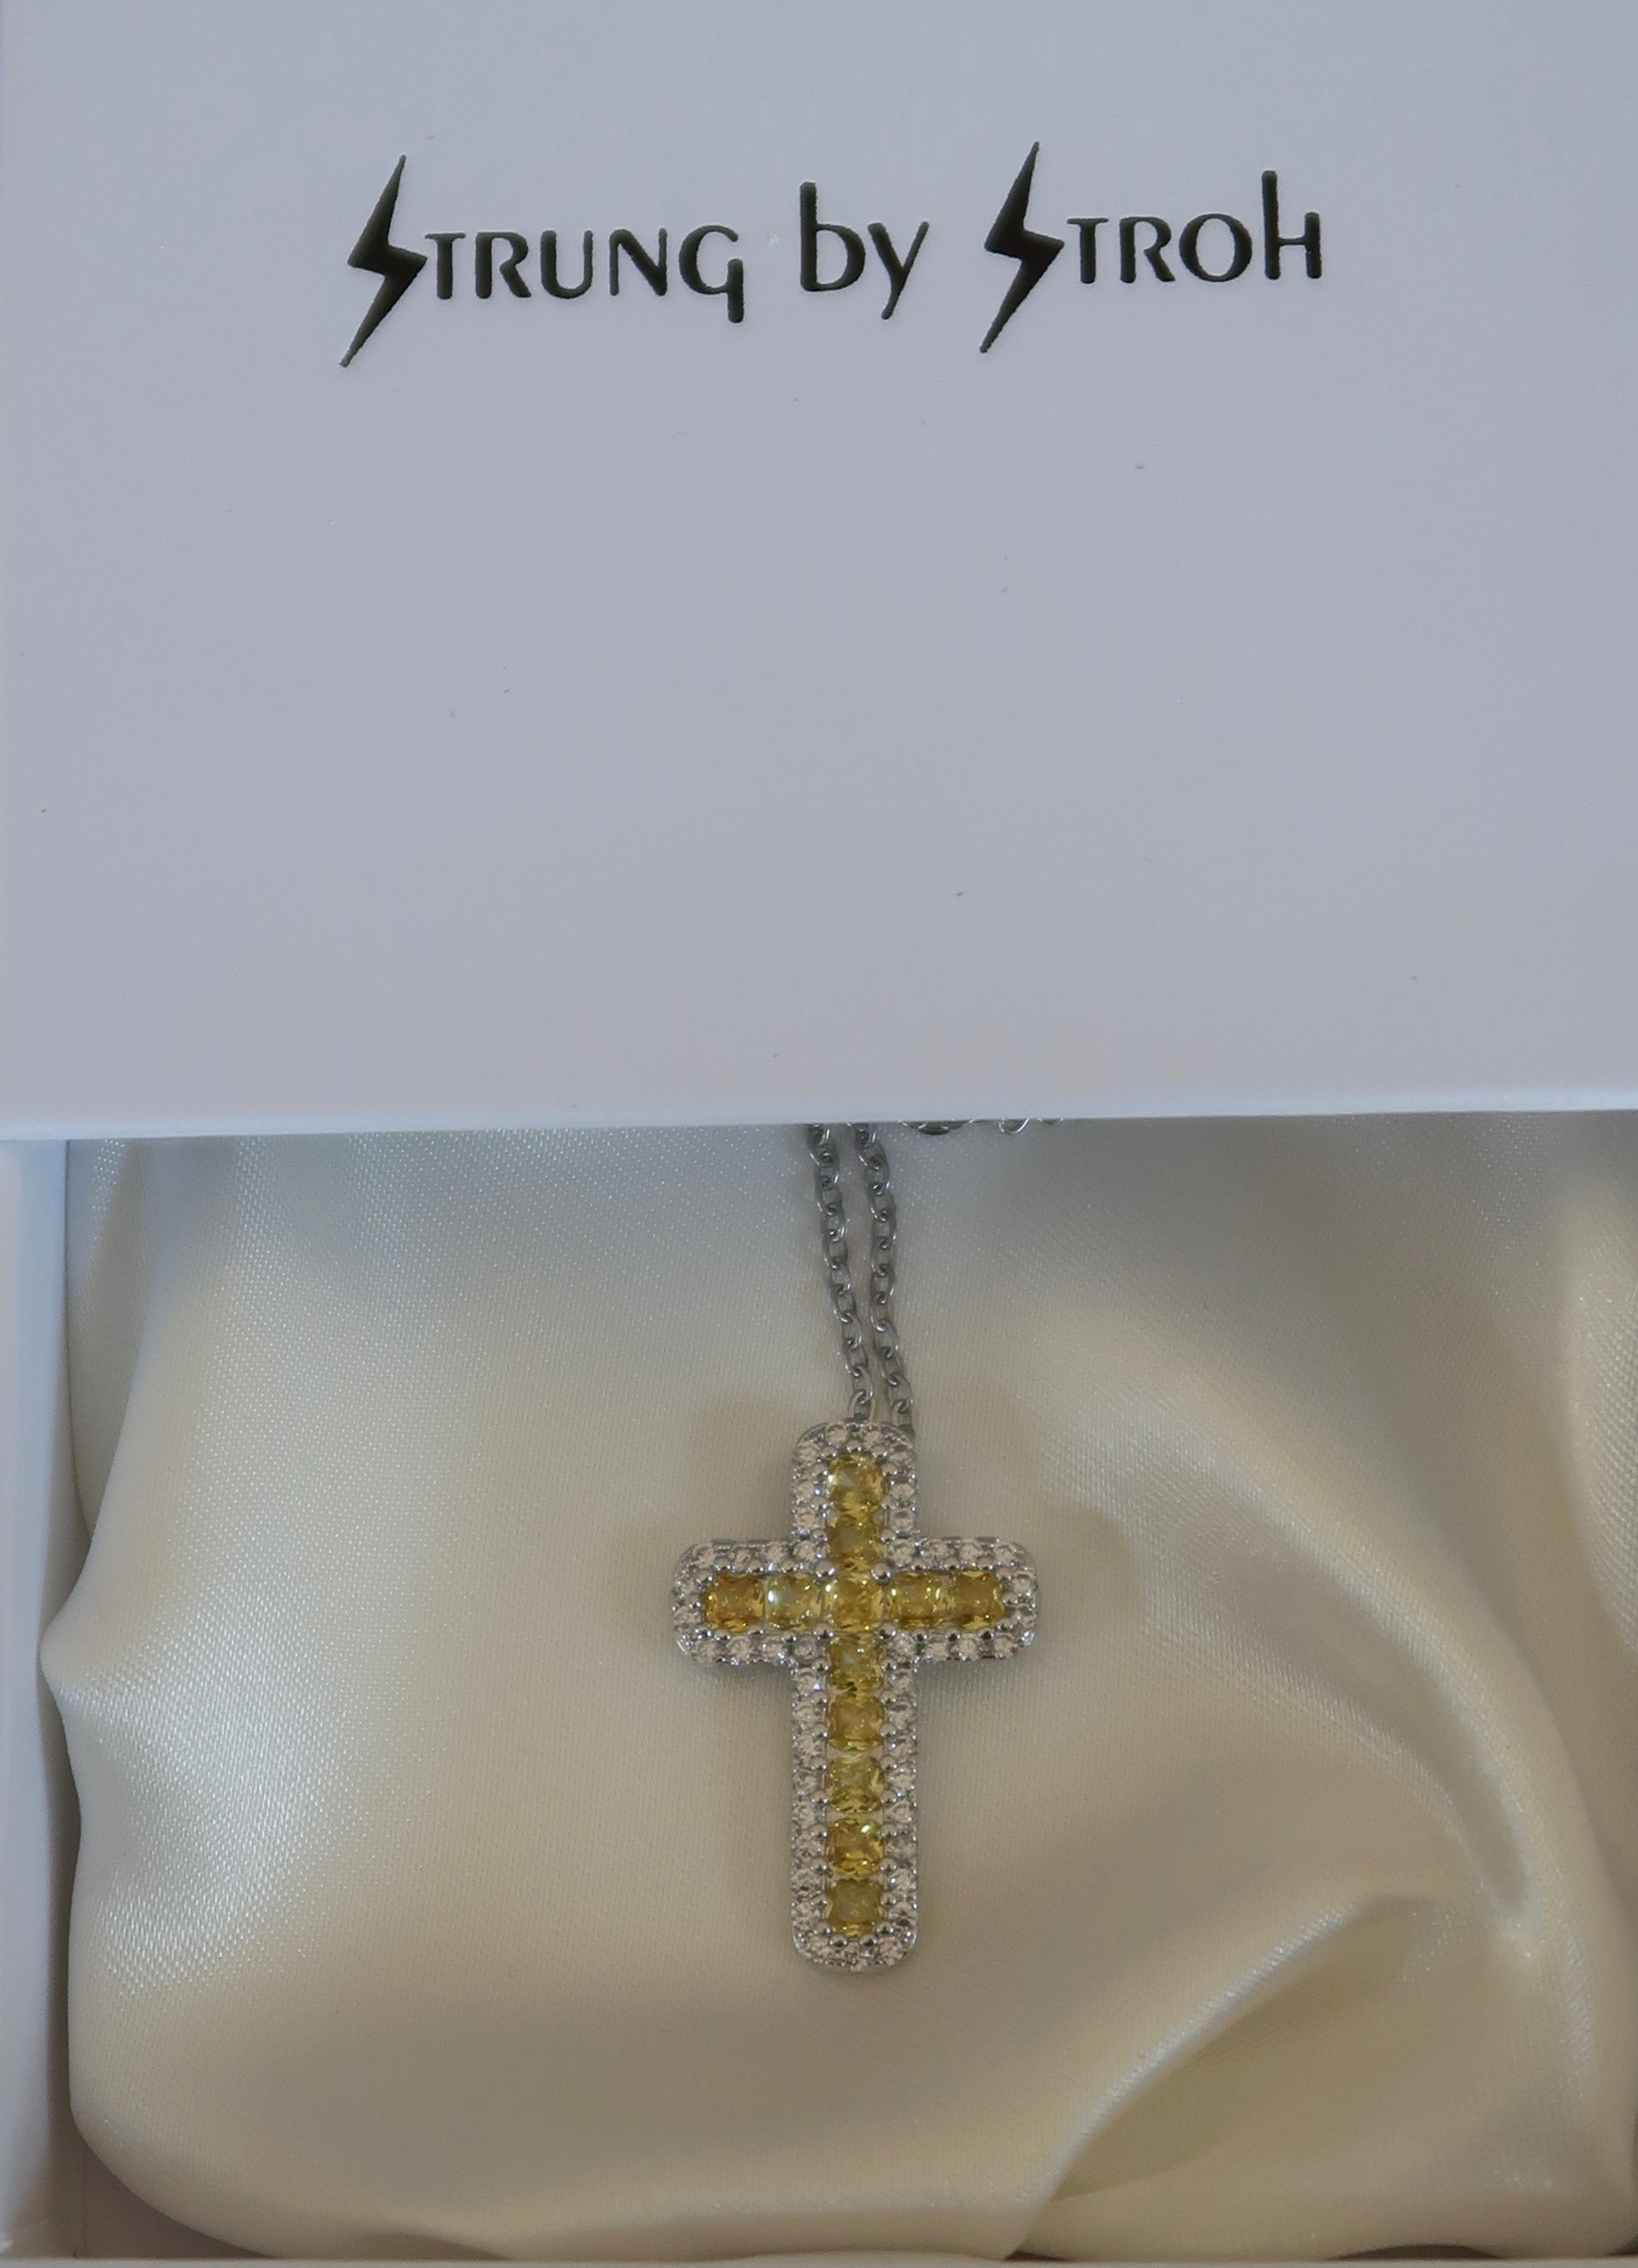 Cleo Cross Necklace: Pre-Order